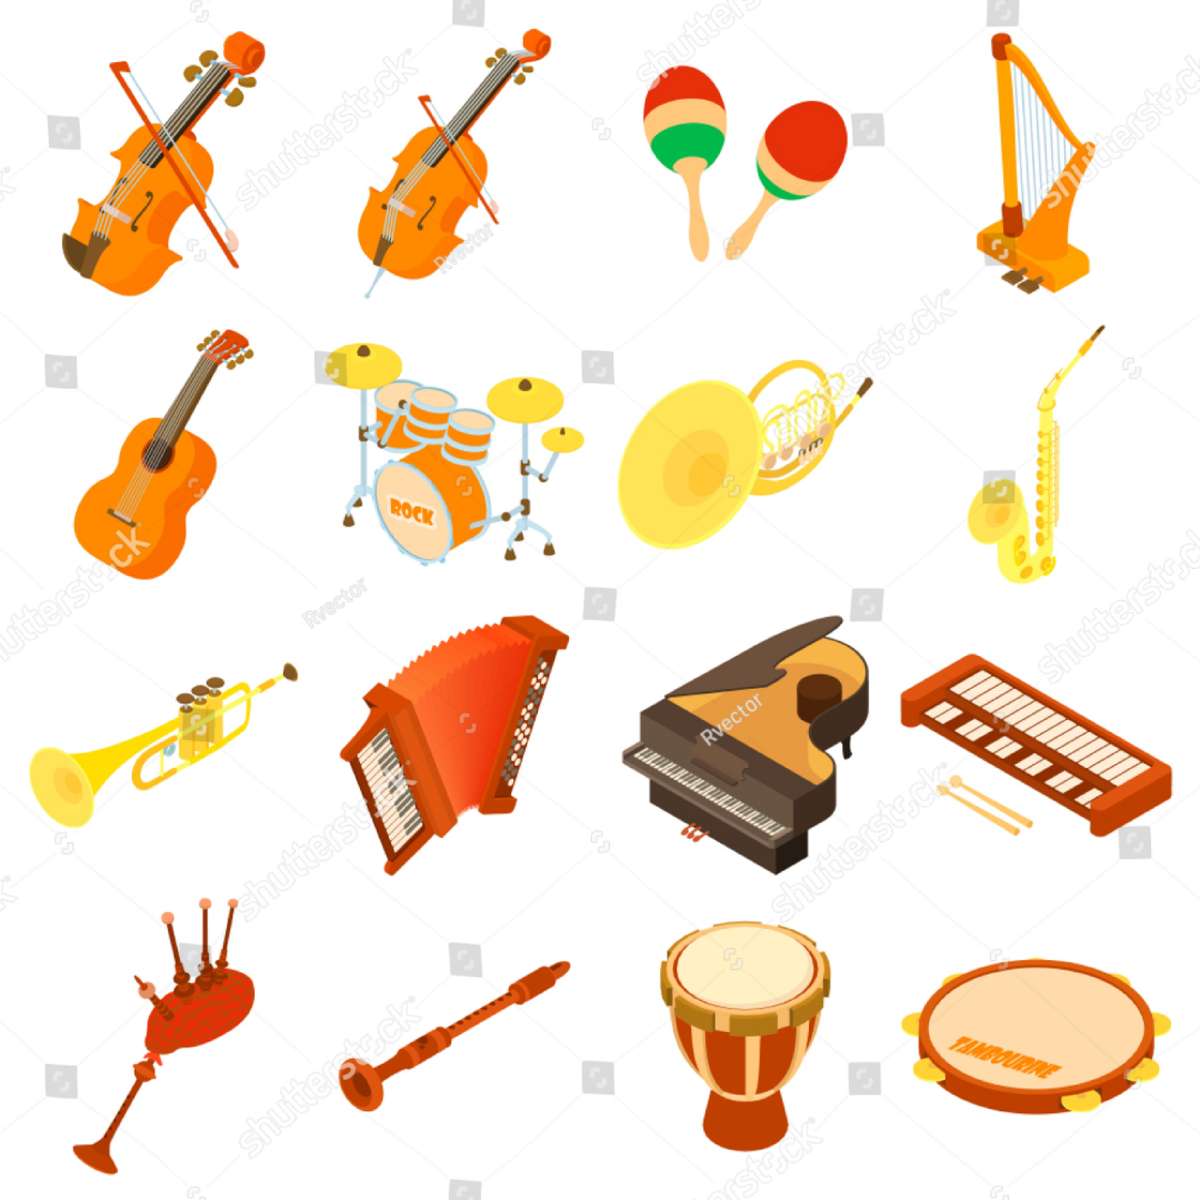 Music instruments puzzle online from photo